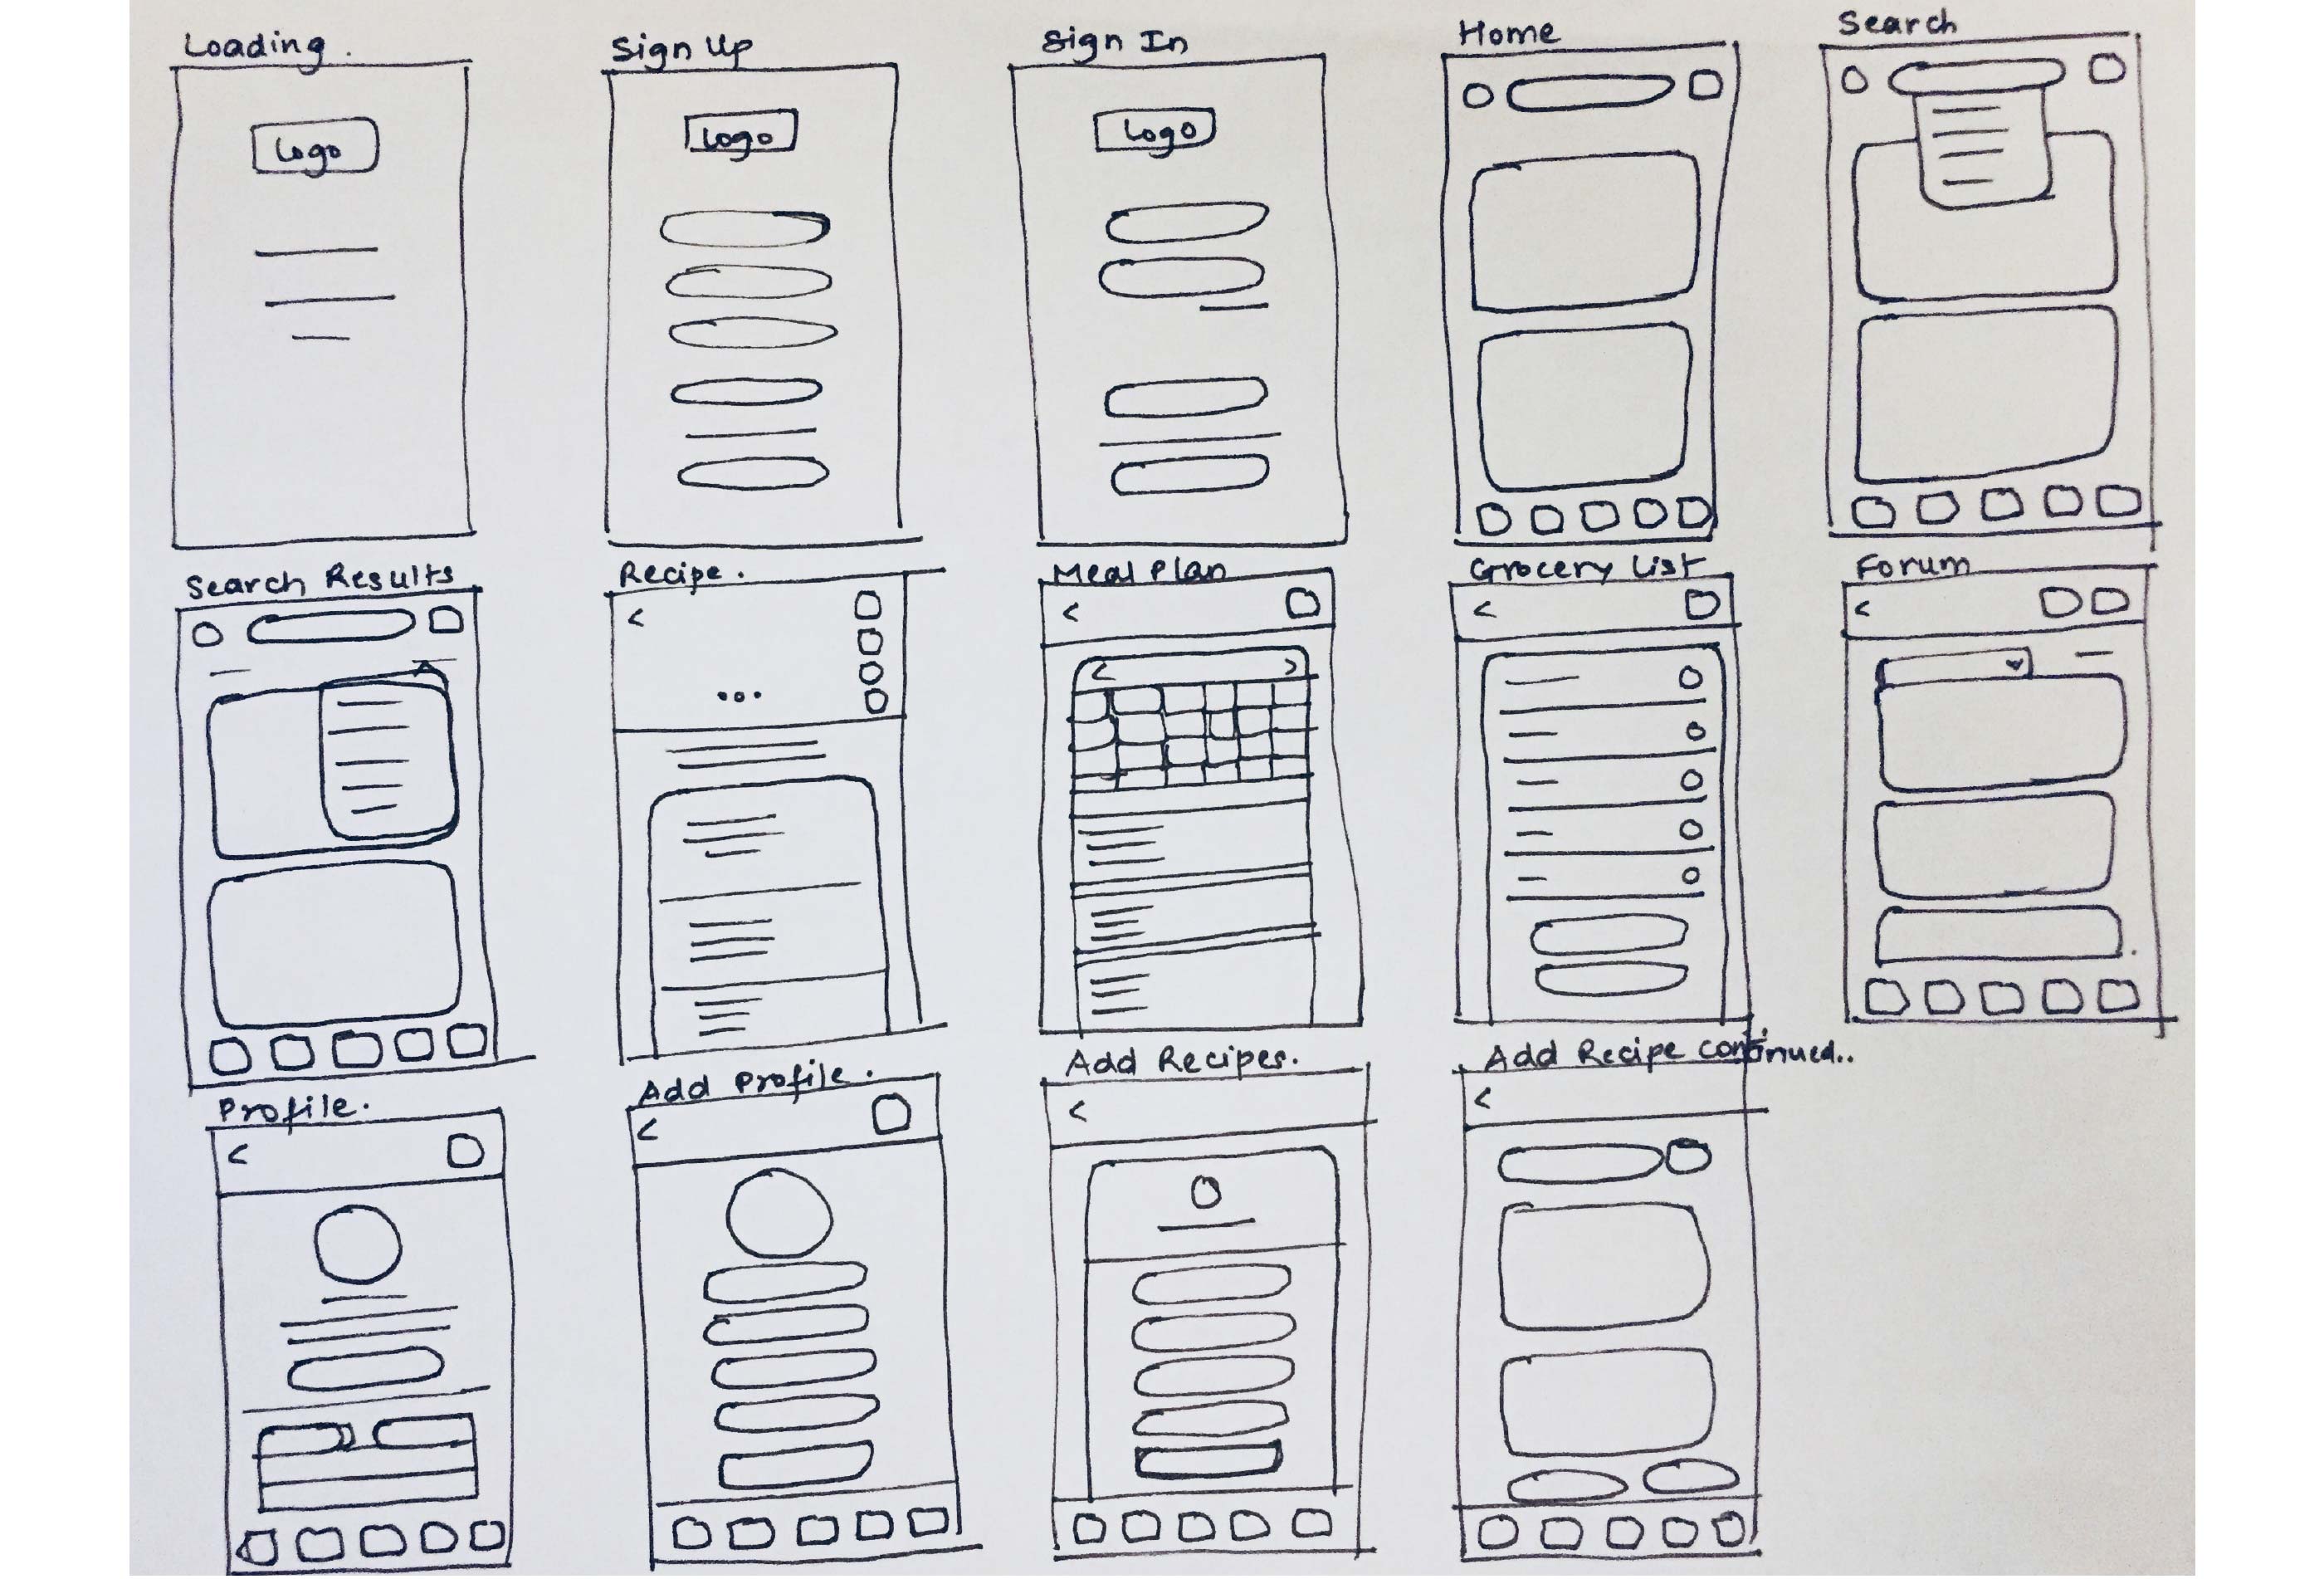 Hand-drawn low-fidelity wireframes of the app.